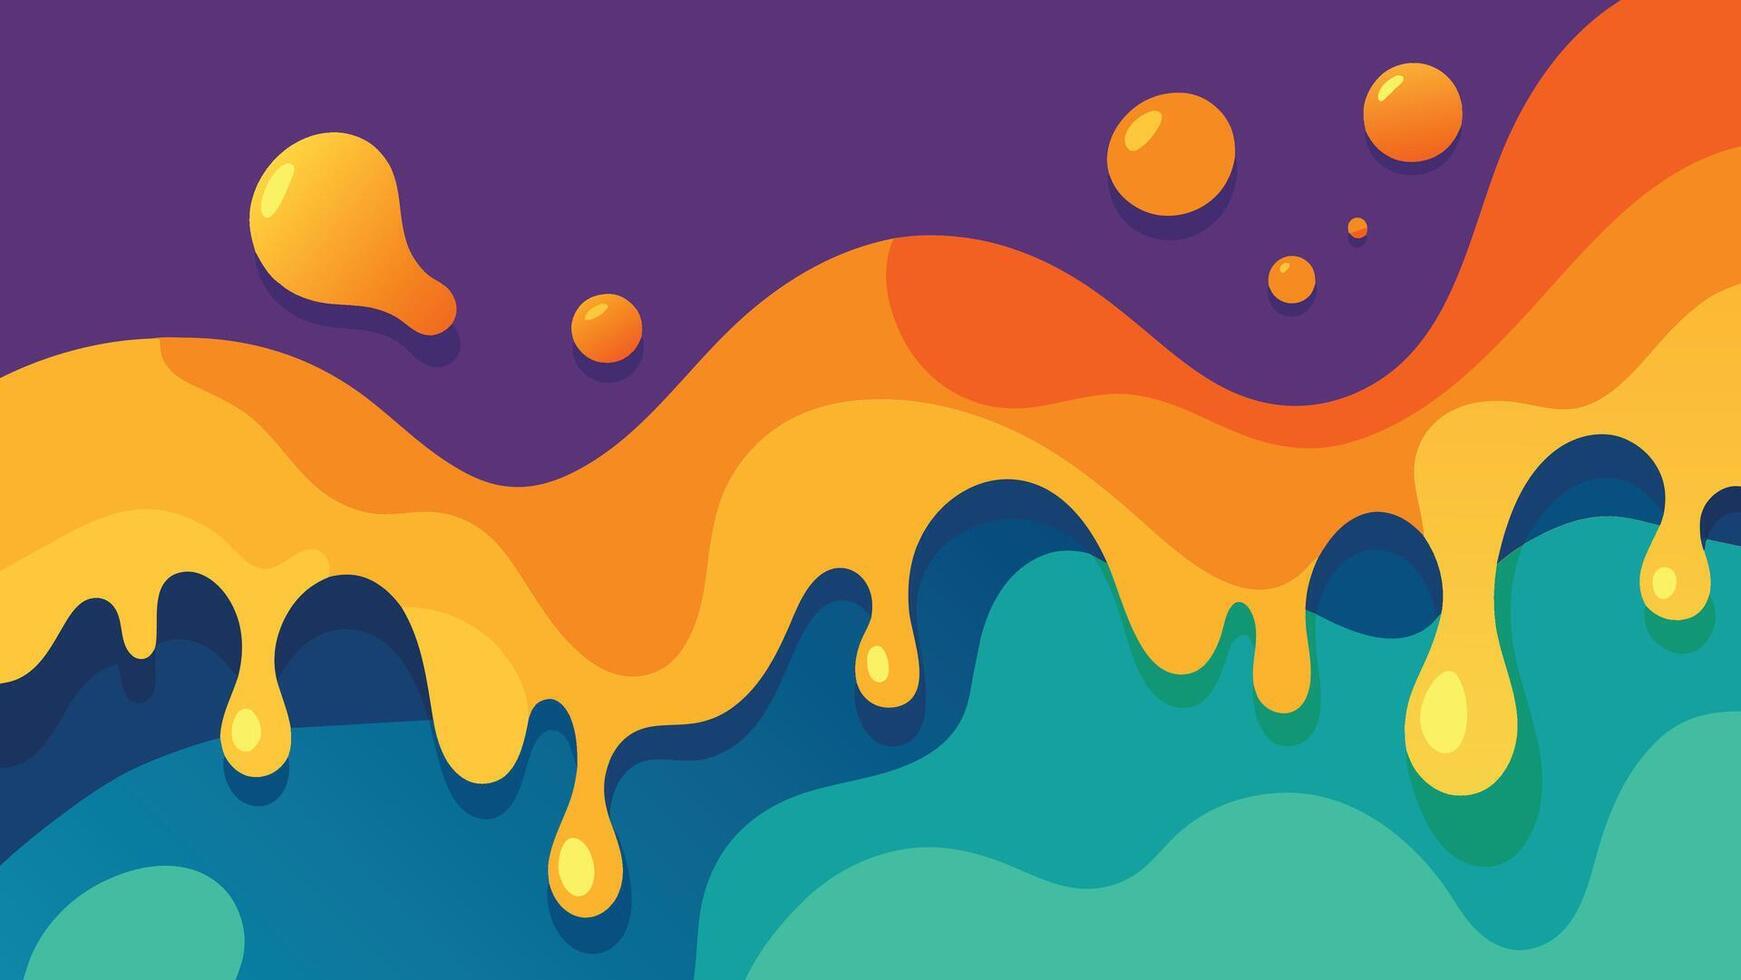 Seamless pattern with dripping orange and blue paint. Vector illustration